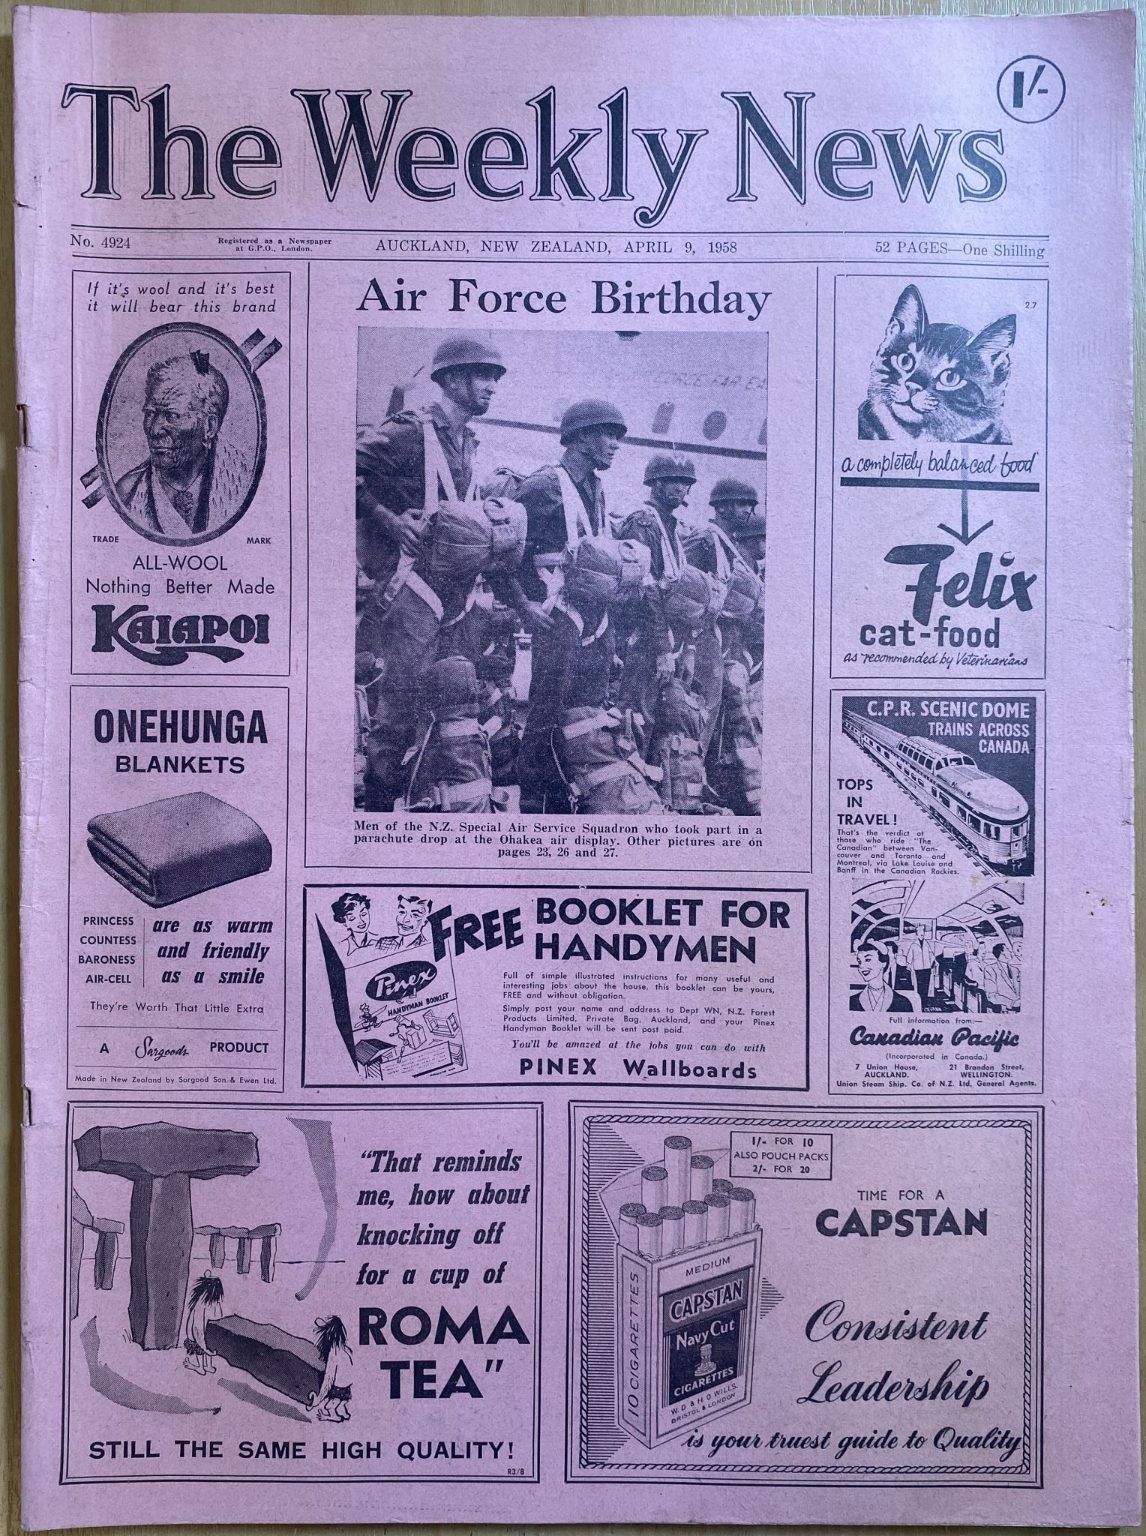 OLD NEWSPAPER: The Weekly News, No. 4924, 9 April 1958